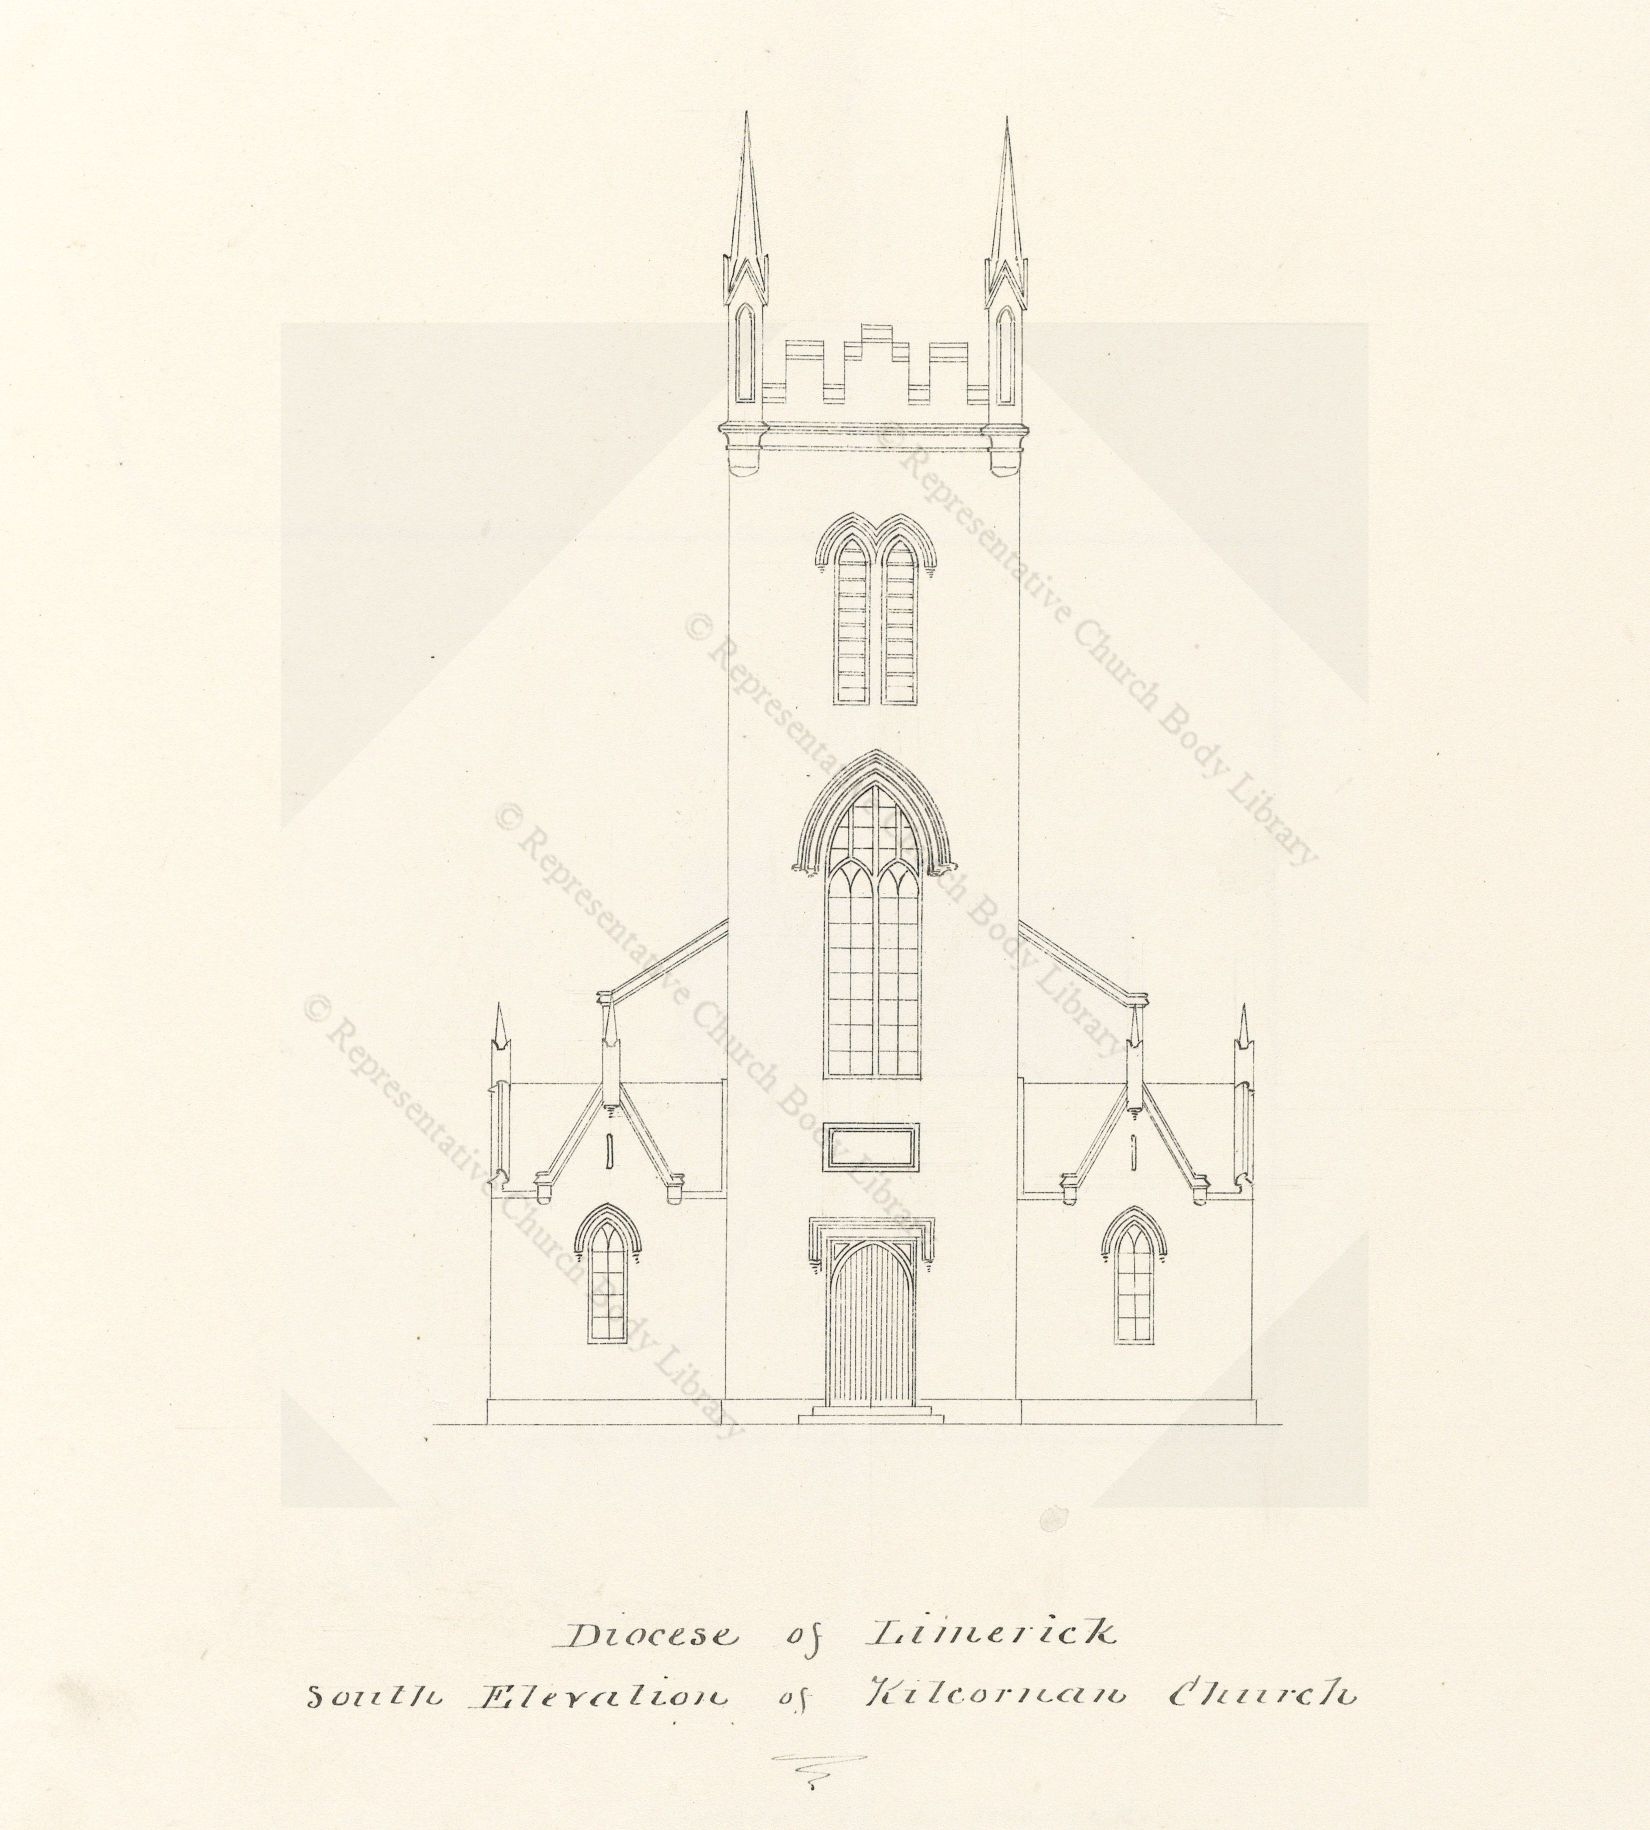 An architectural drawing of Kilcornan Church, Castletown, Co. Limerick. The church was built in 1831 using Board of First Fruits funding and was deconsecrated in 1956.  Today despite its history, the church and graveyard are in fair state of repair.